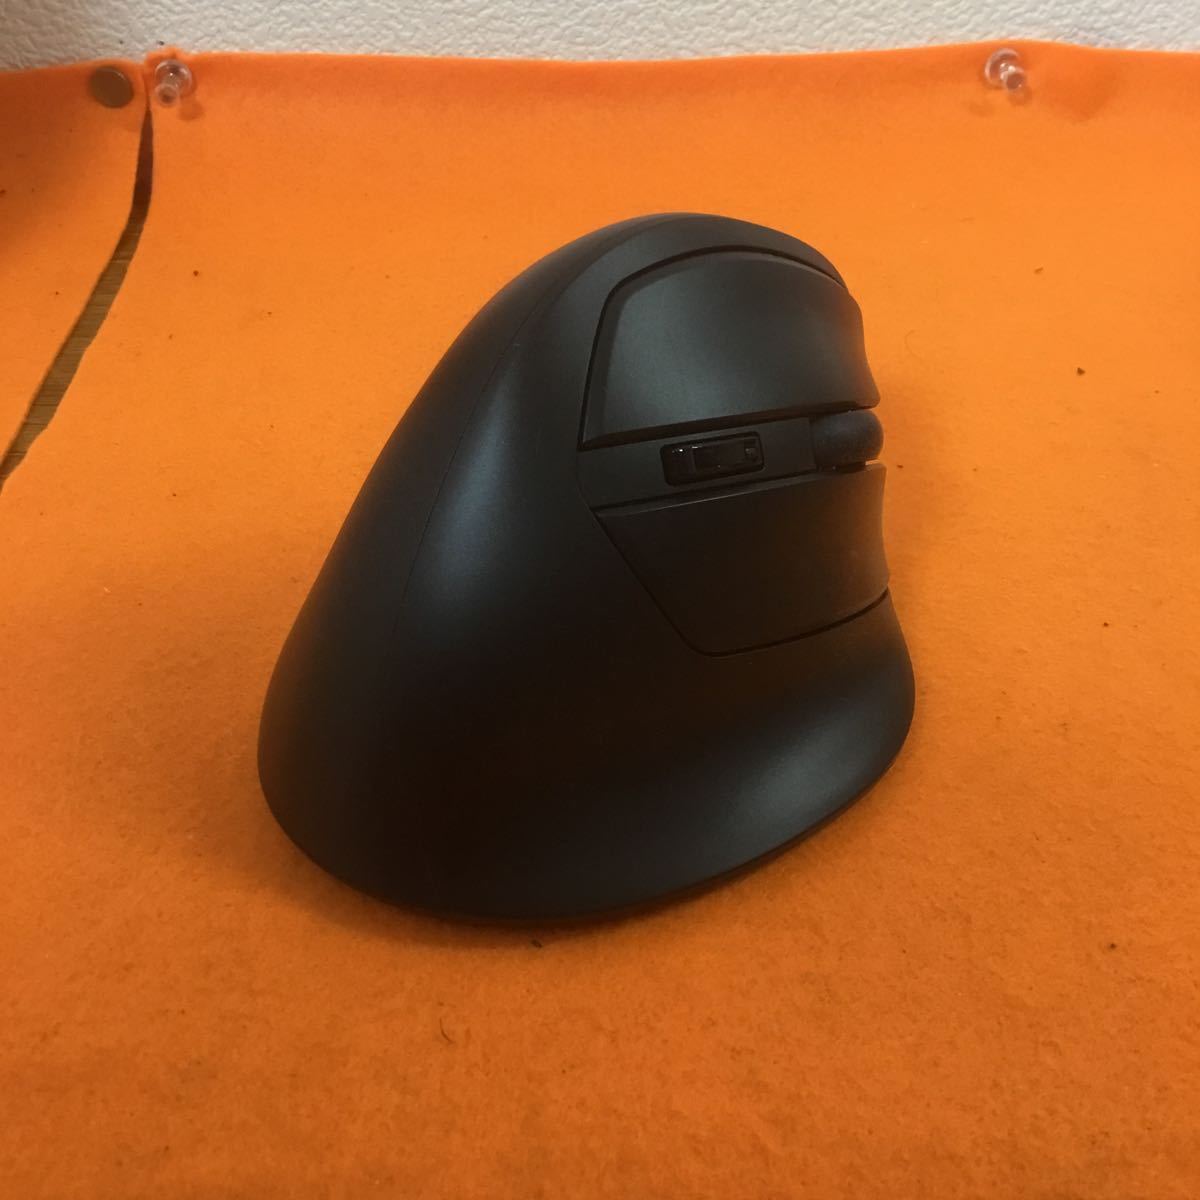 Z-609geo L gono Miku s mouse Bluetooth + wireless mouse trackball mouse 6 button GRFD-MUS VM06T BK * operation verification ending 